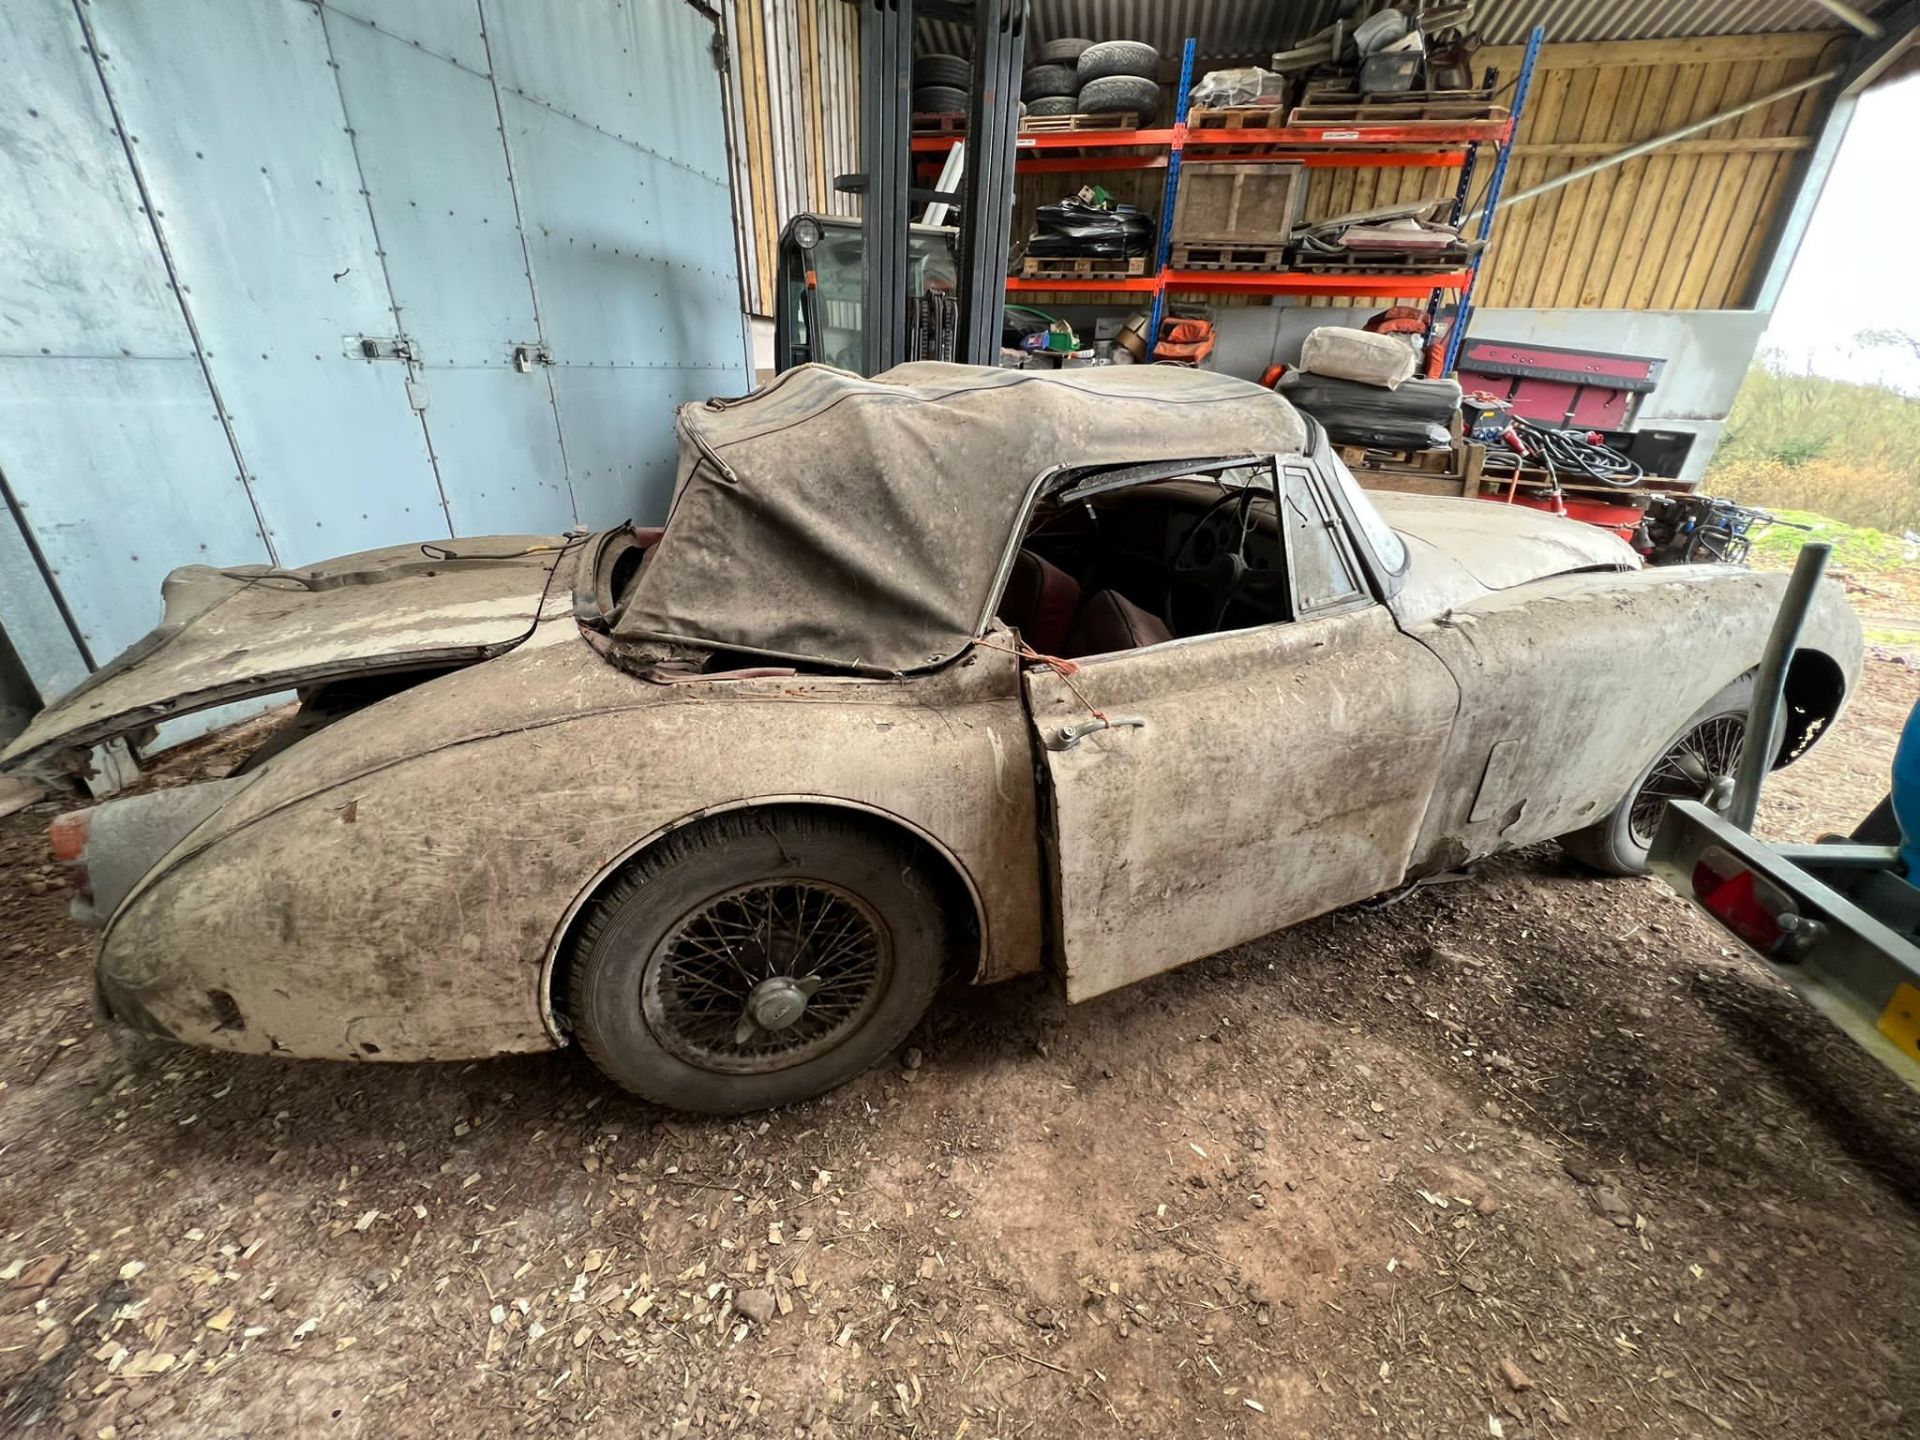 Jaguar XK150 3.4 Drop Head Coupe 1958 Barn Find. Matching numbers. - Image 22 of 27